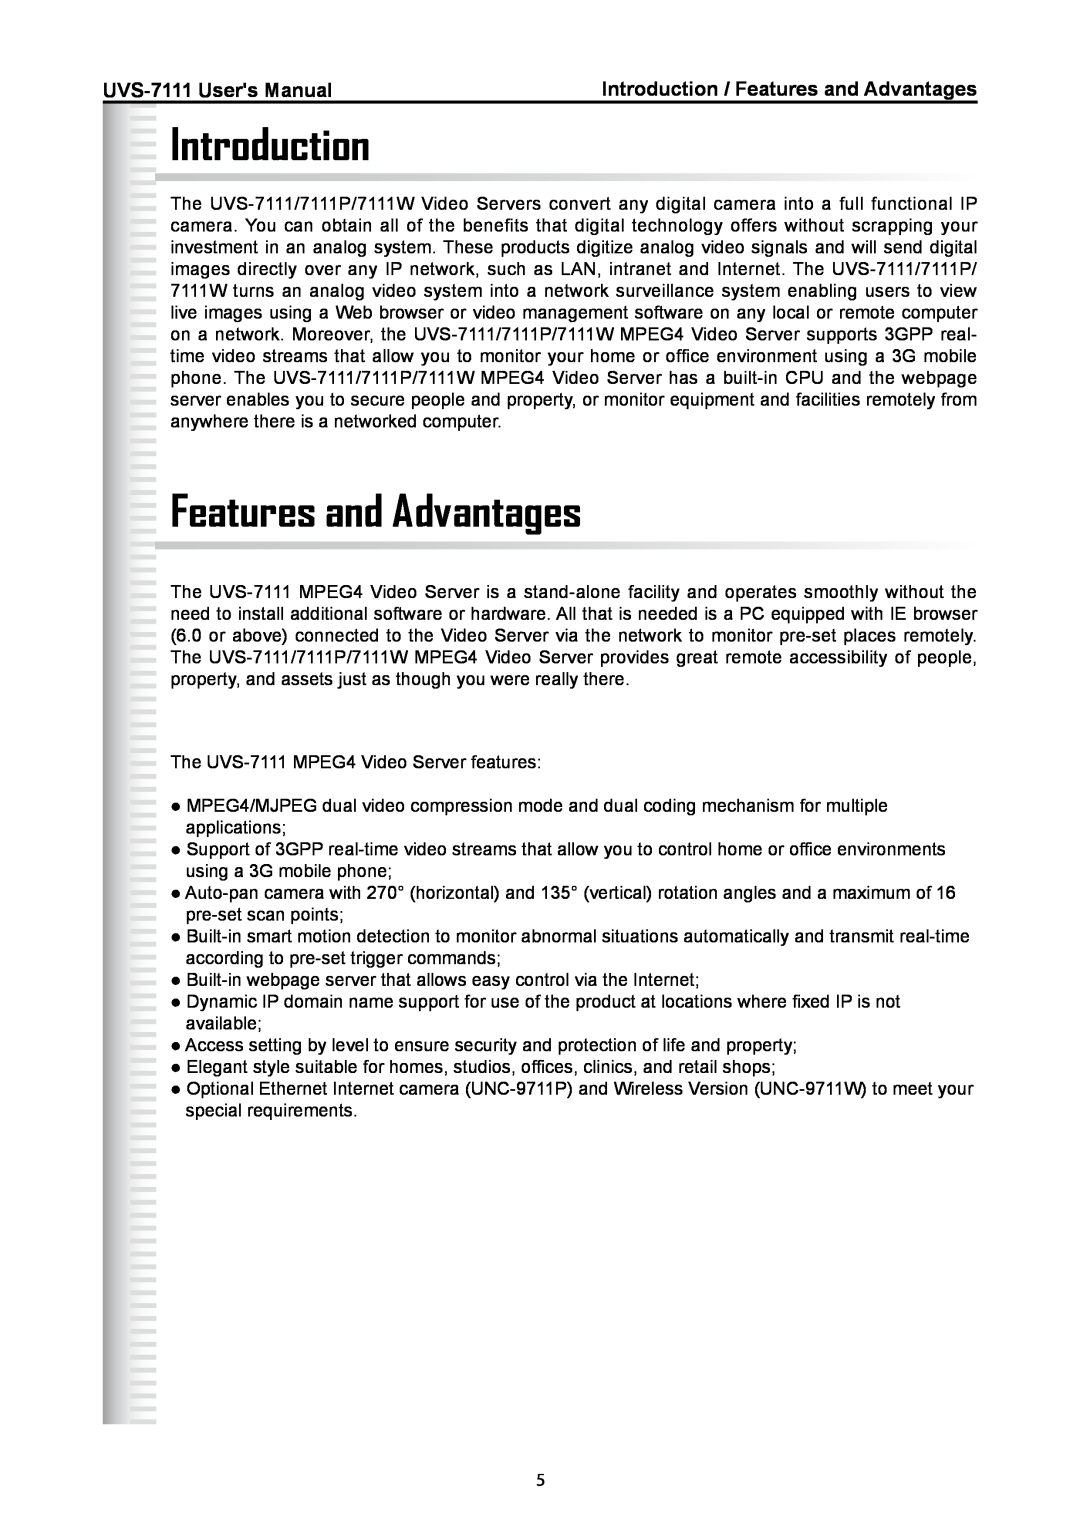 Active Thermal Management manual Introduction, Features and Advantages, UVS-7111 Users Manual 